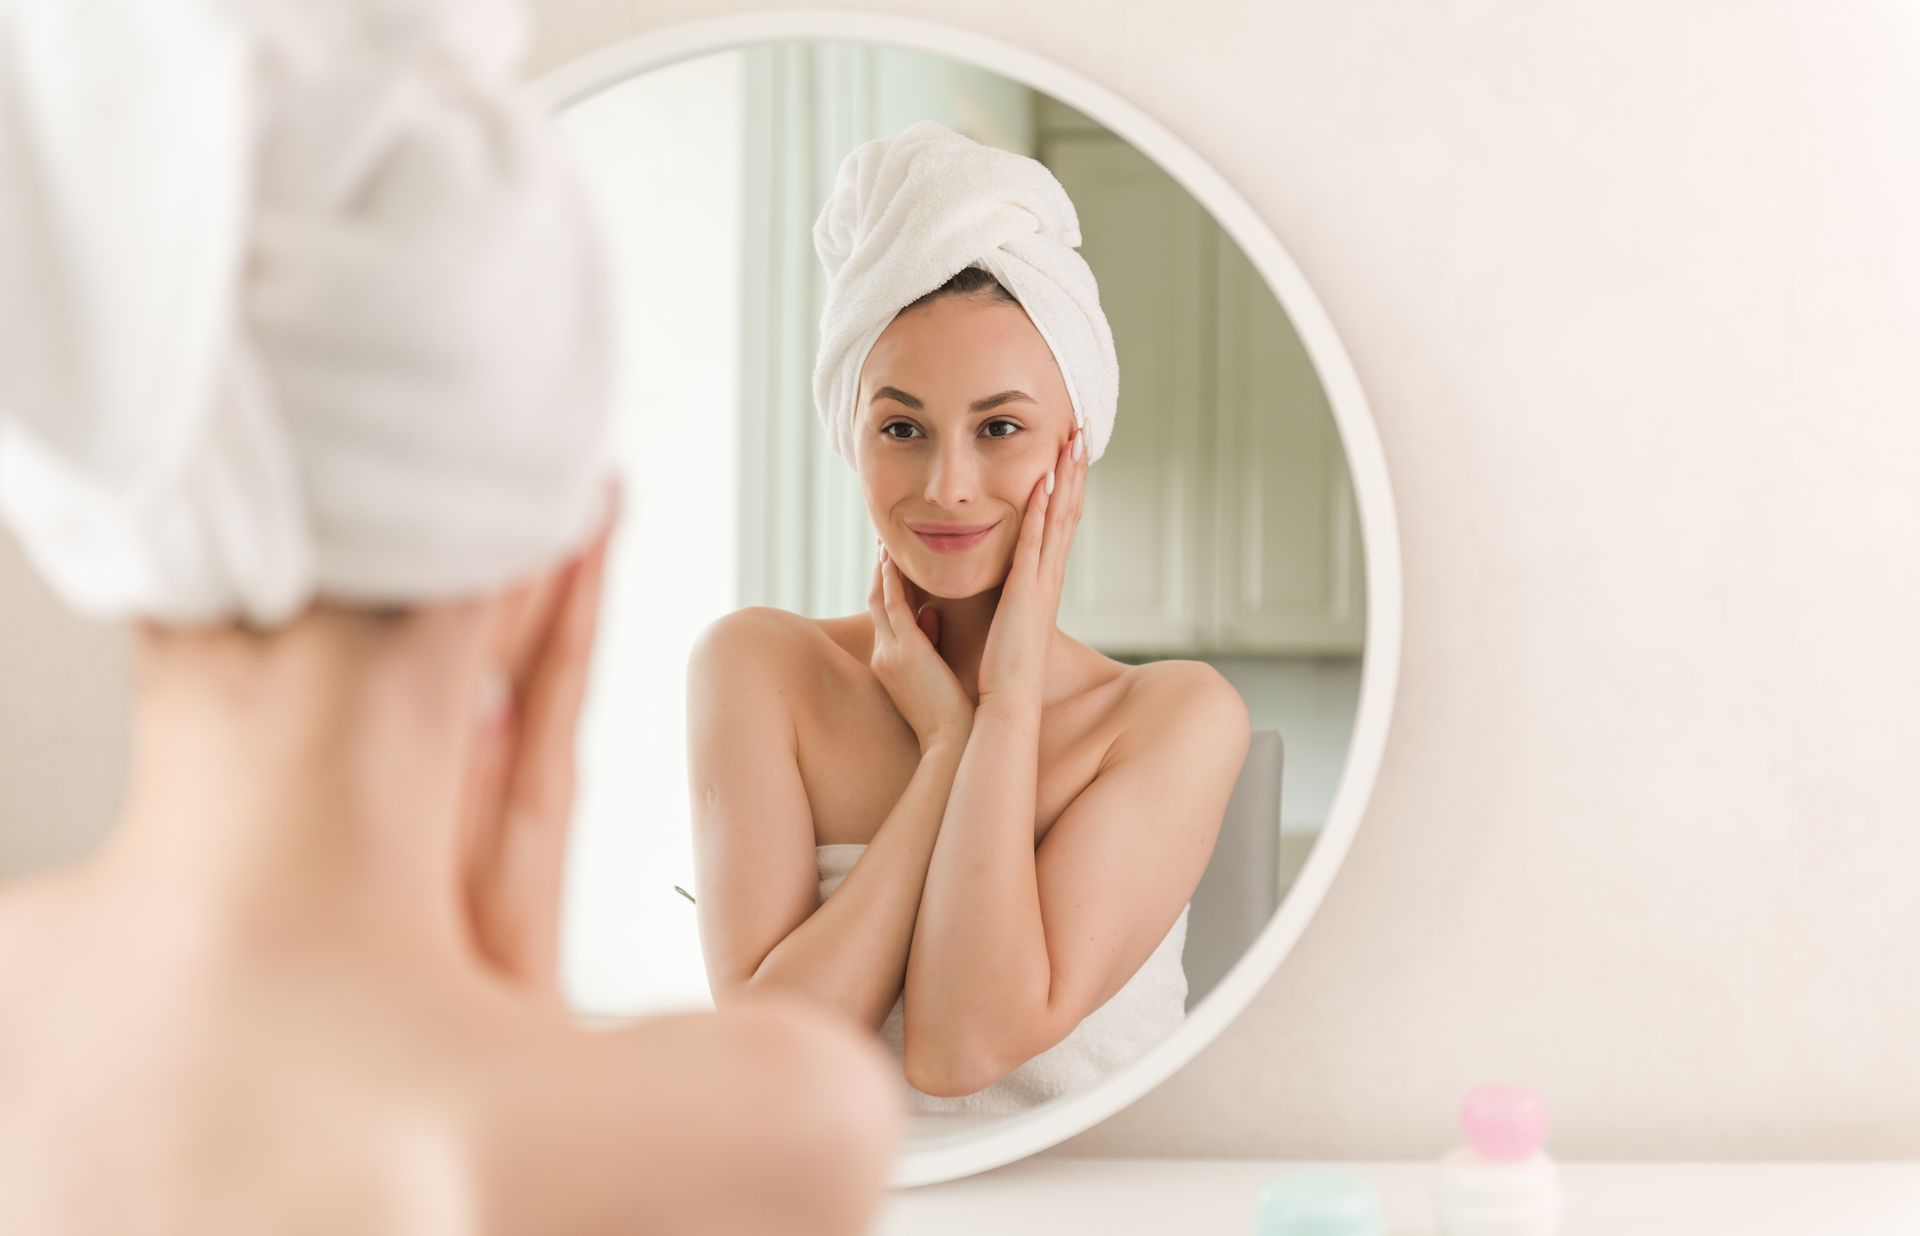 A woman with a towel wrapped around her head is looking at her reflection in a mirror.